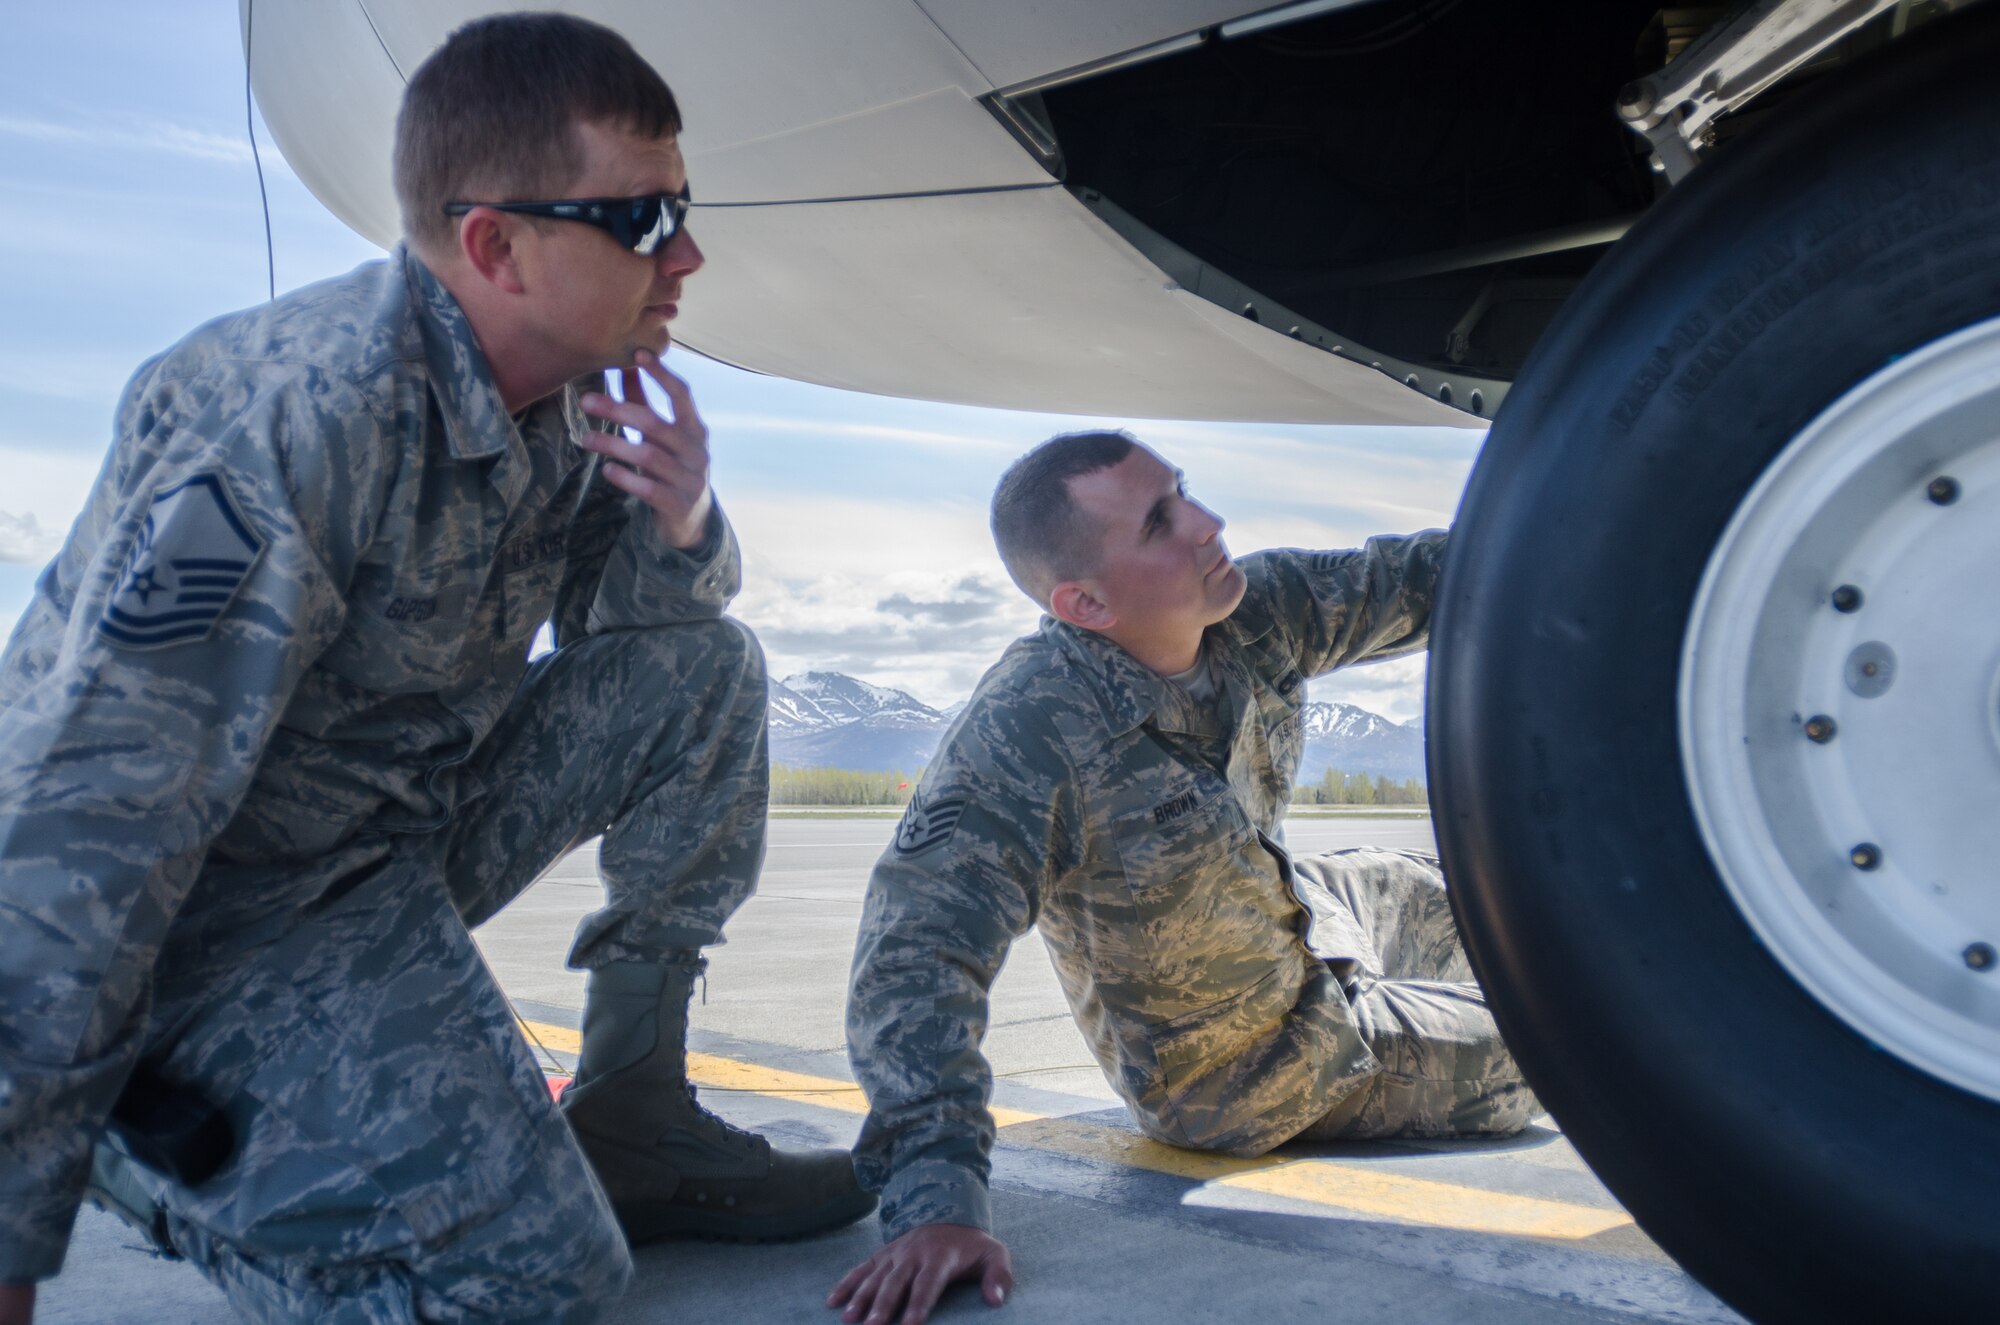 Master Sgt. Lonie Gipson (left), 123rd Aircraft Maintenance Squadron expediter, and Staff Sgt. Eric Brown, crew chief for the 123rd Aircraft Maintenance Squadron, inspect a Kentucky Air National Guard C-130 Hercules prior to flight operations at Joint Base Elmendorf-Richardson, Alaska, on May 8, 2014. More than 100 Airmen from the Kentucky Air National Guard’s 123rd Airlift Wing are currently deployed to participate in Red Flag-Alaska. (U.S. Air National Guard photo by Master Sgt. Phil Speck)